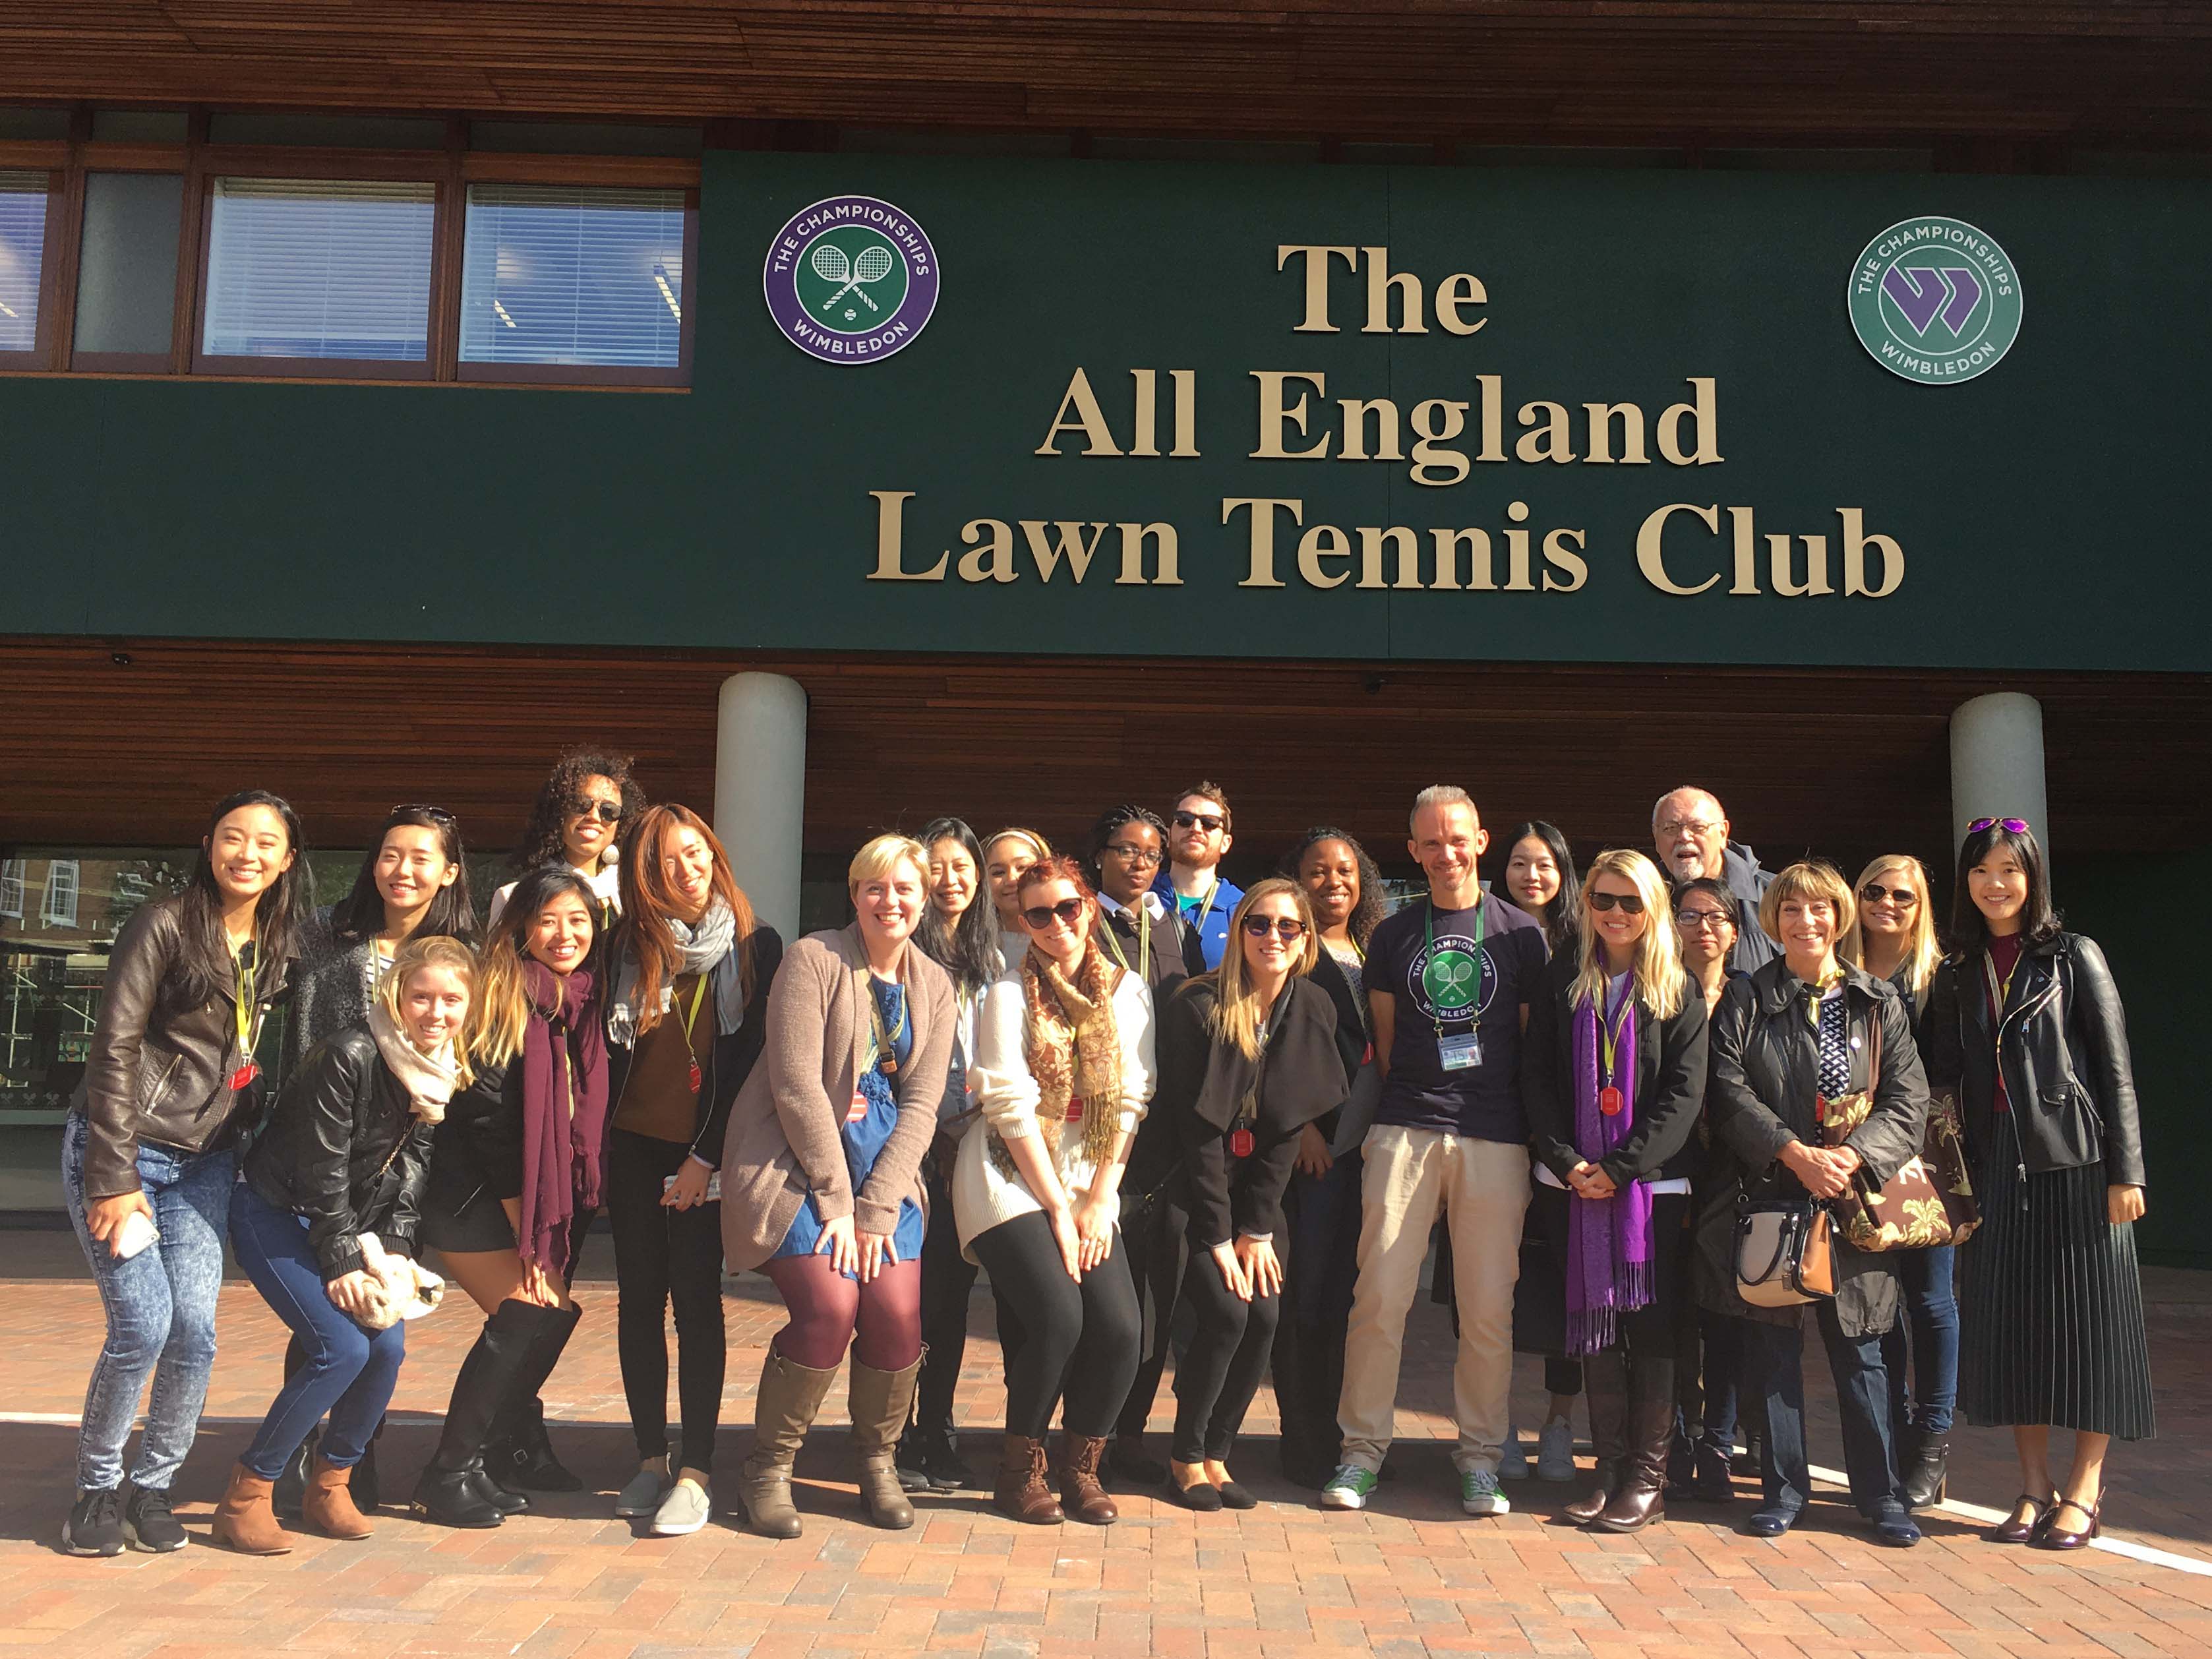 A group of IMC students and faculty outside The All England Lawn Tennis Club.